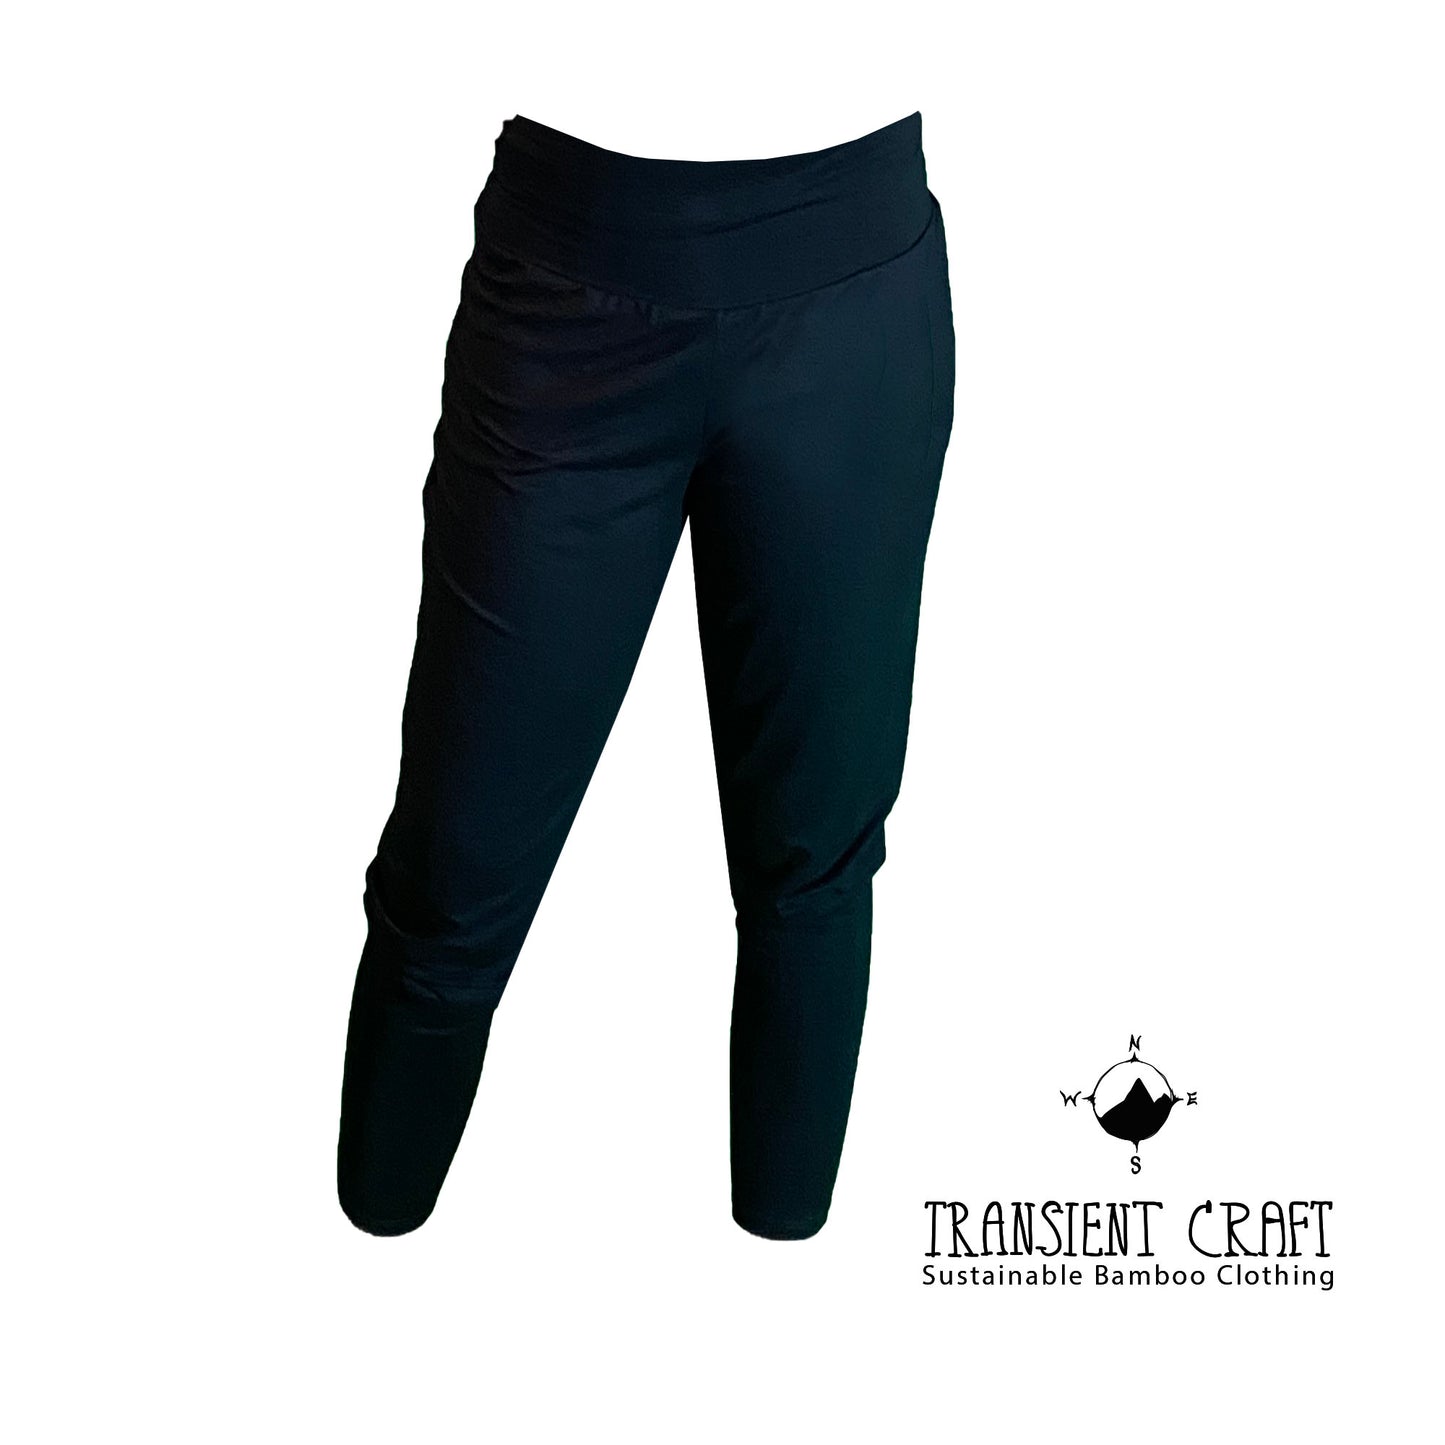 Harem Meets Yoga Pants - BLACK Women's Leggings - Made from Bamboo - S-XXL Active Lounge wear